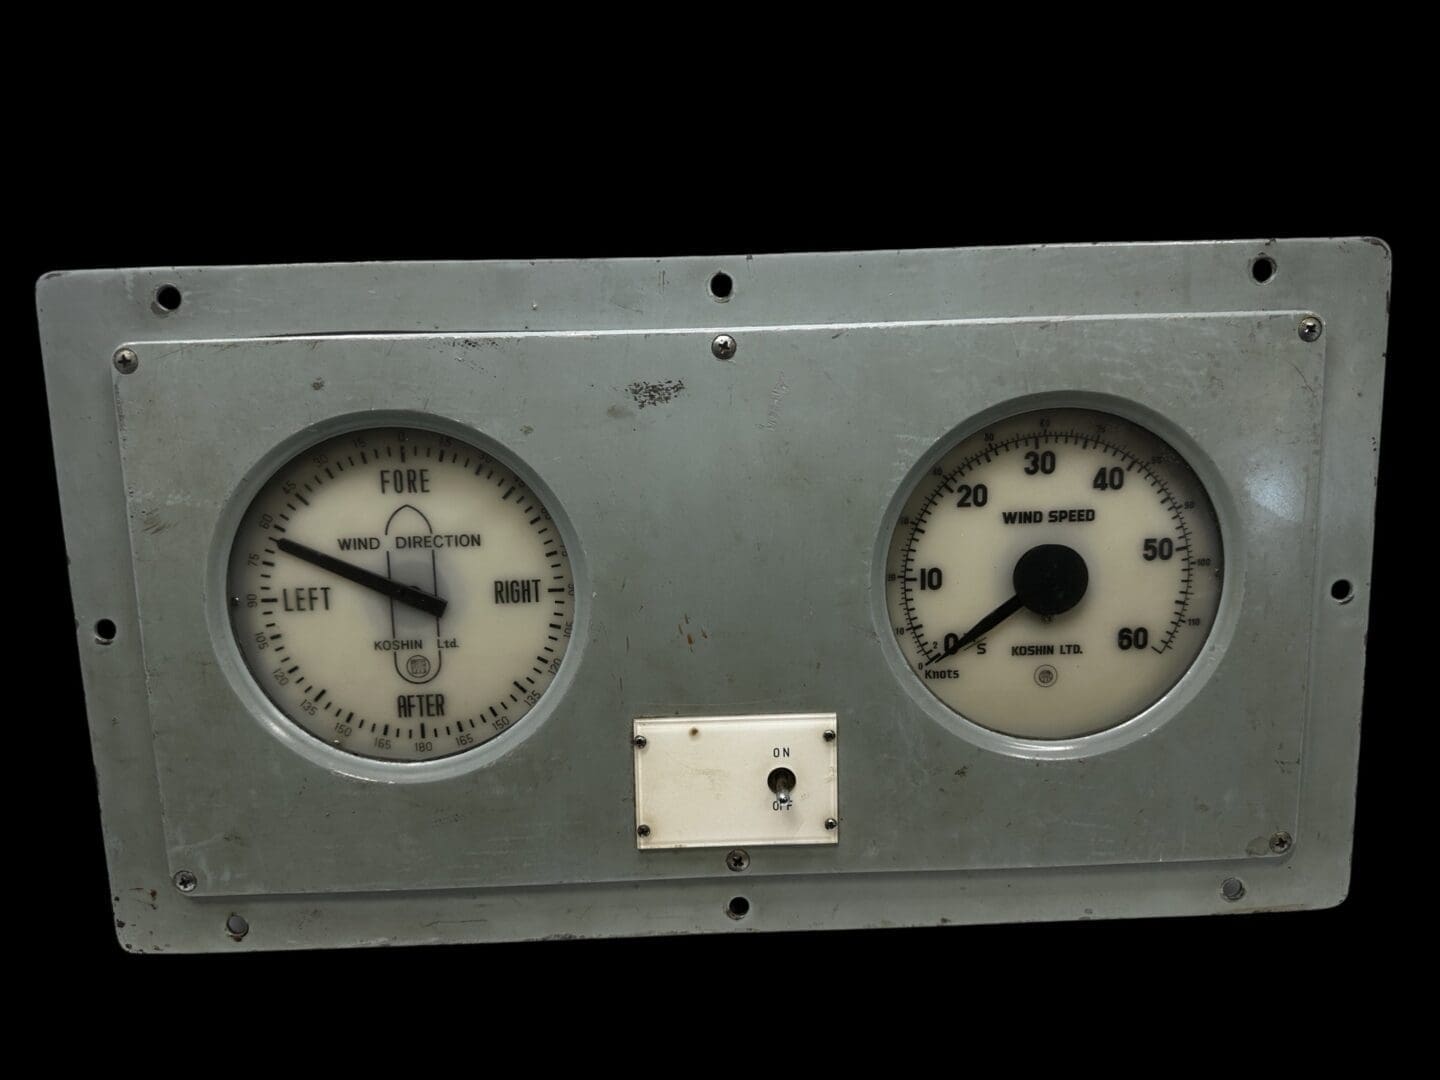 A close up of an old style gauges